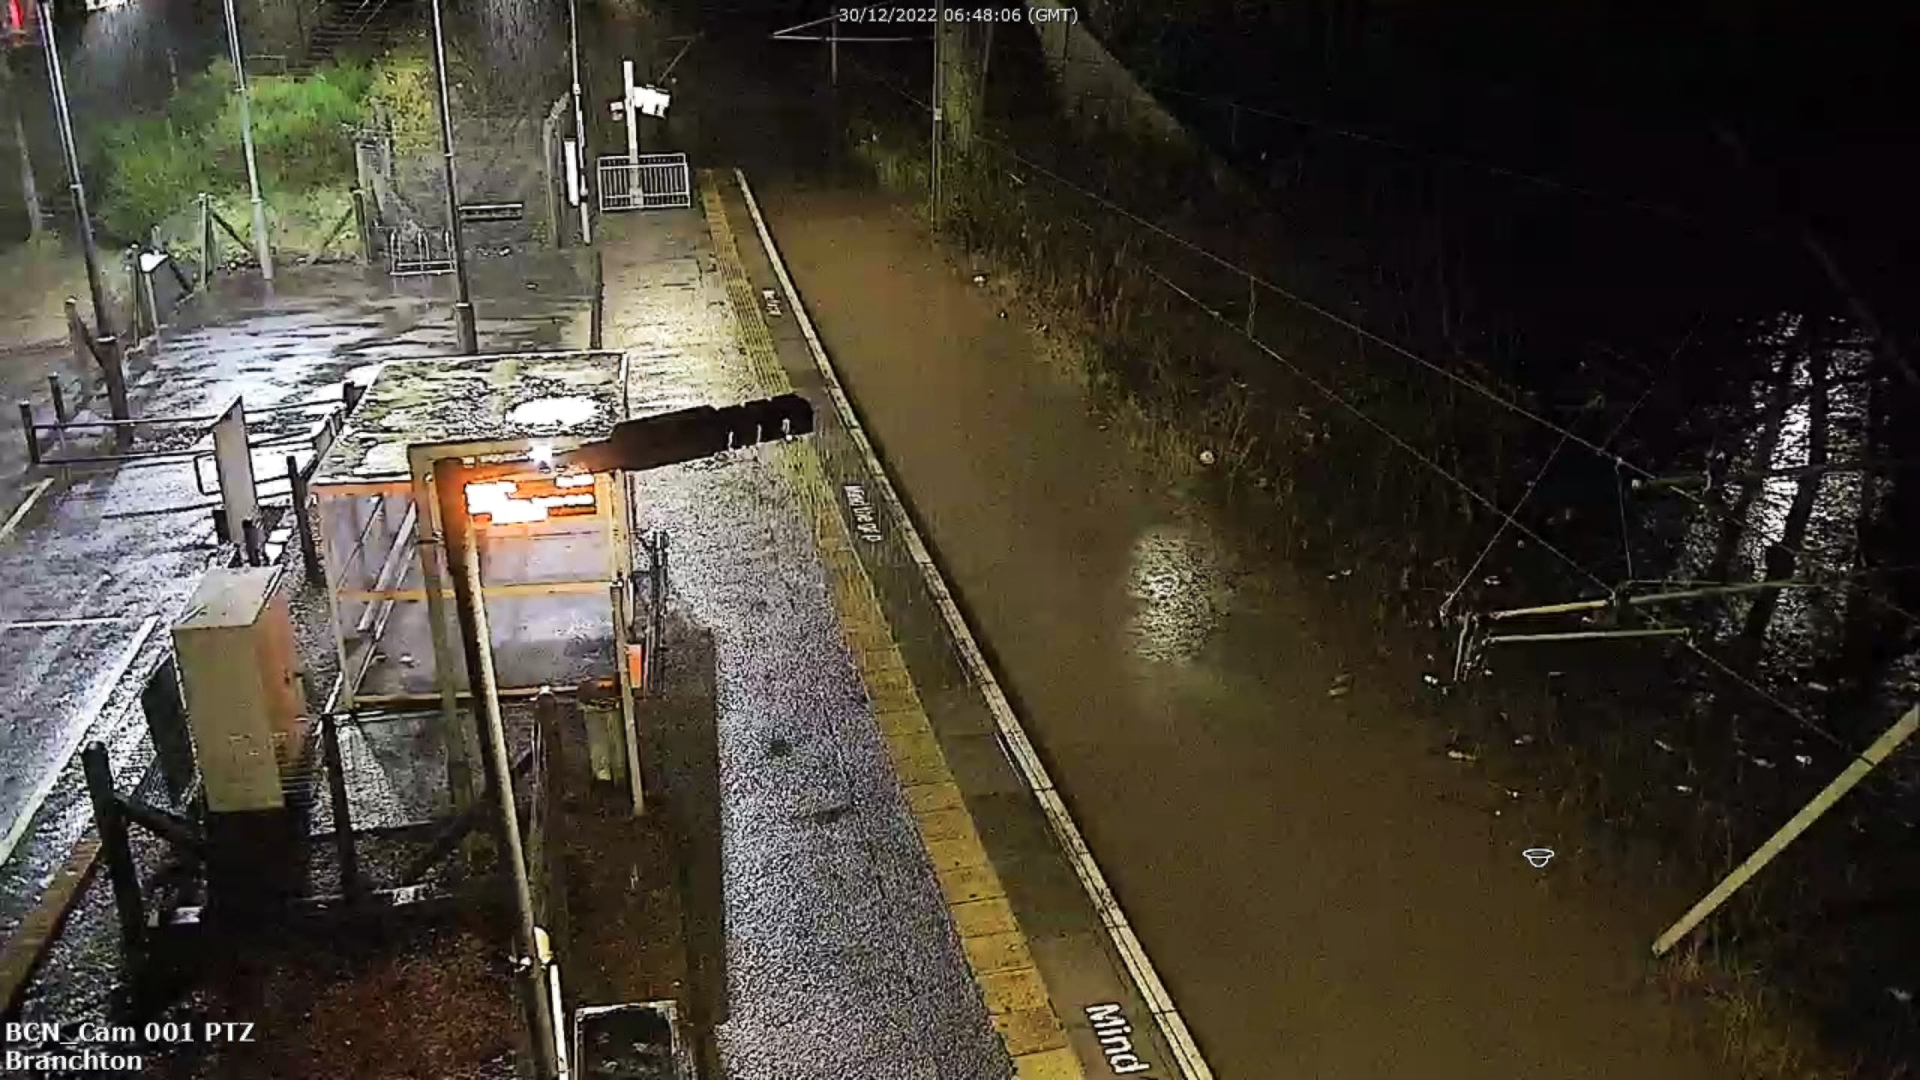 The Wemyss Bay line is flooded at Branchton.